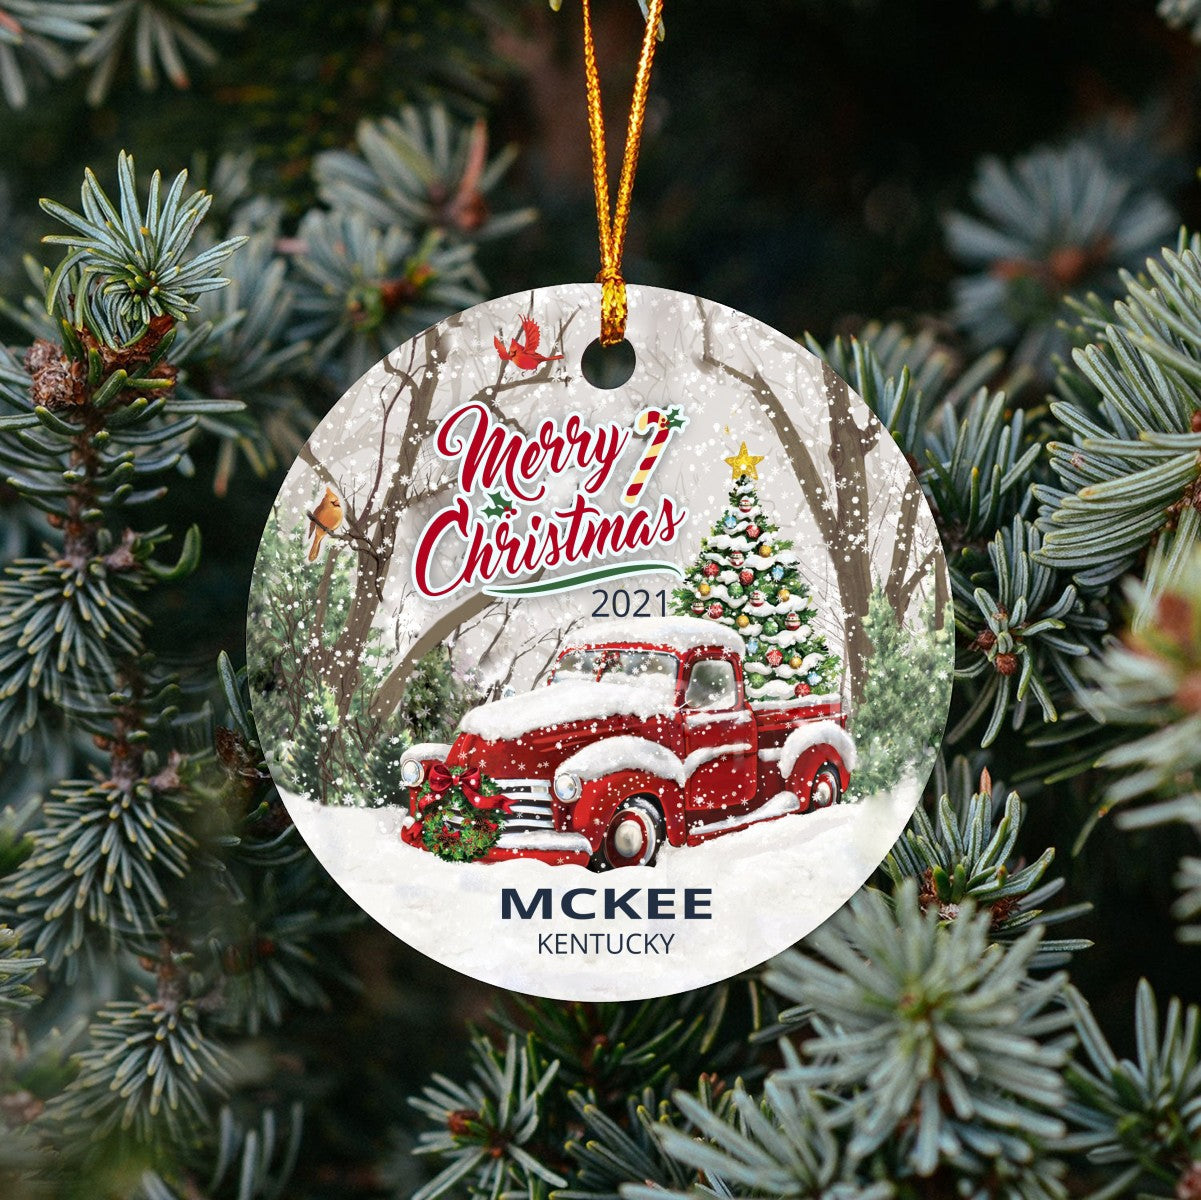 Christmas Tree Ornaments McKee - Ornament Customize With Name City And State McKee Kentucky KY - Red Truck Xmas Ornaments 3'' Plastic Gift For Family, Friend And Housewarming